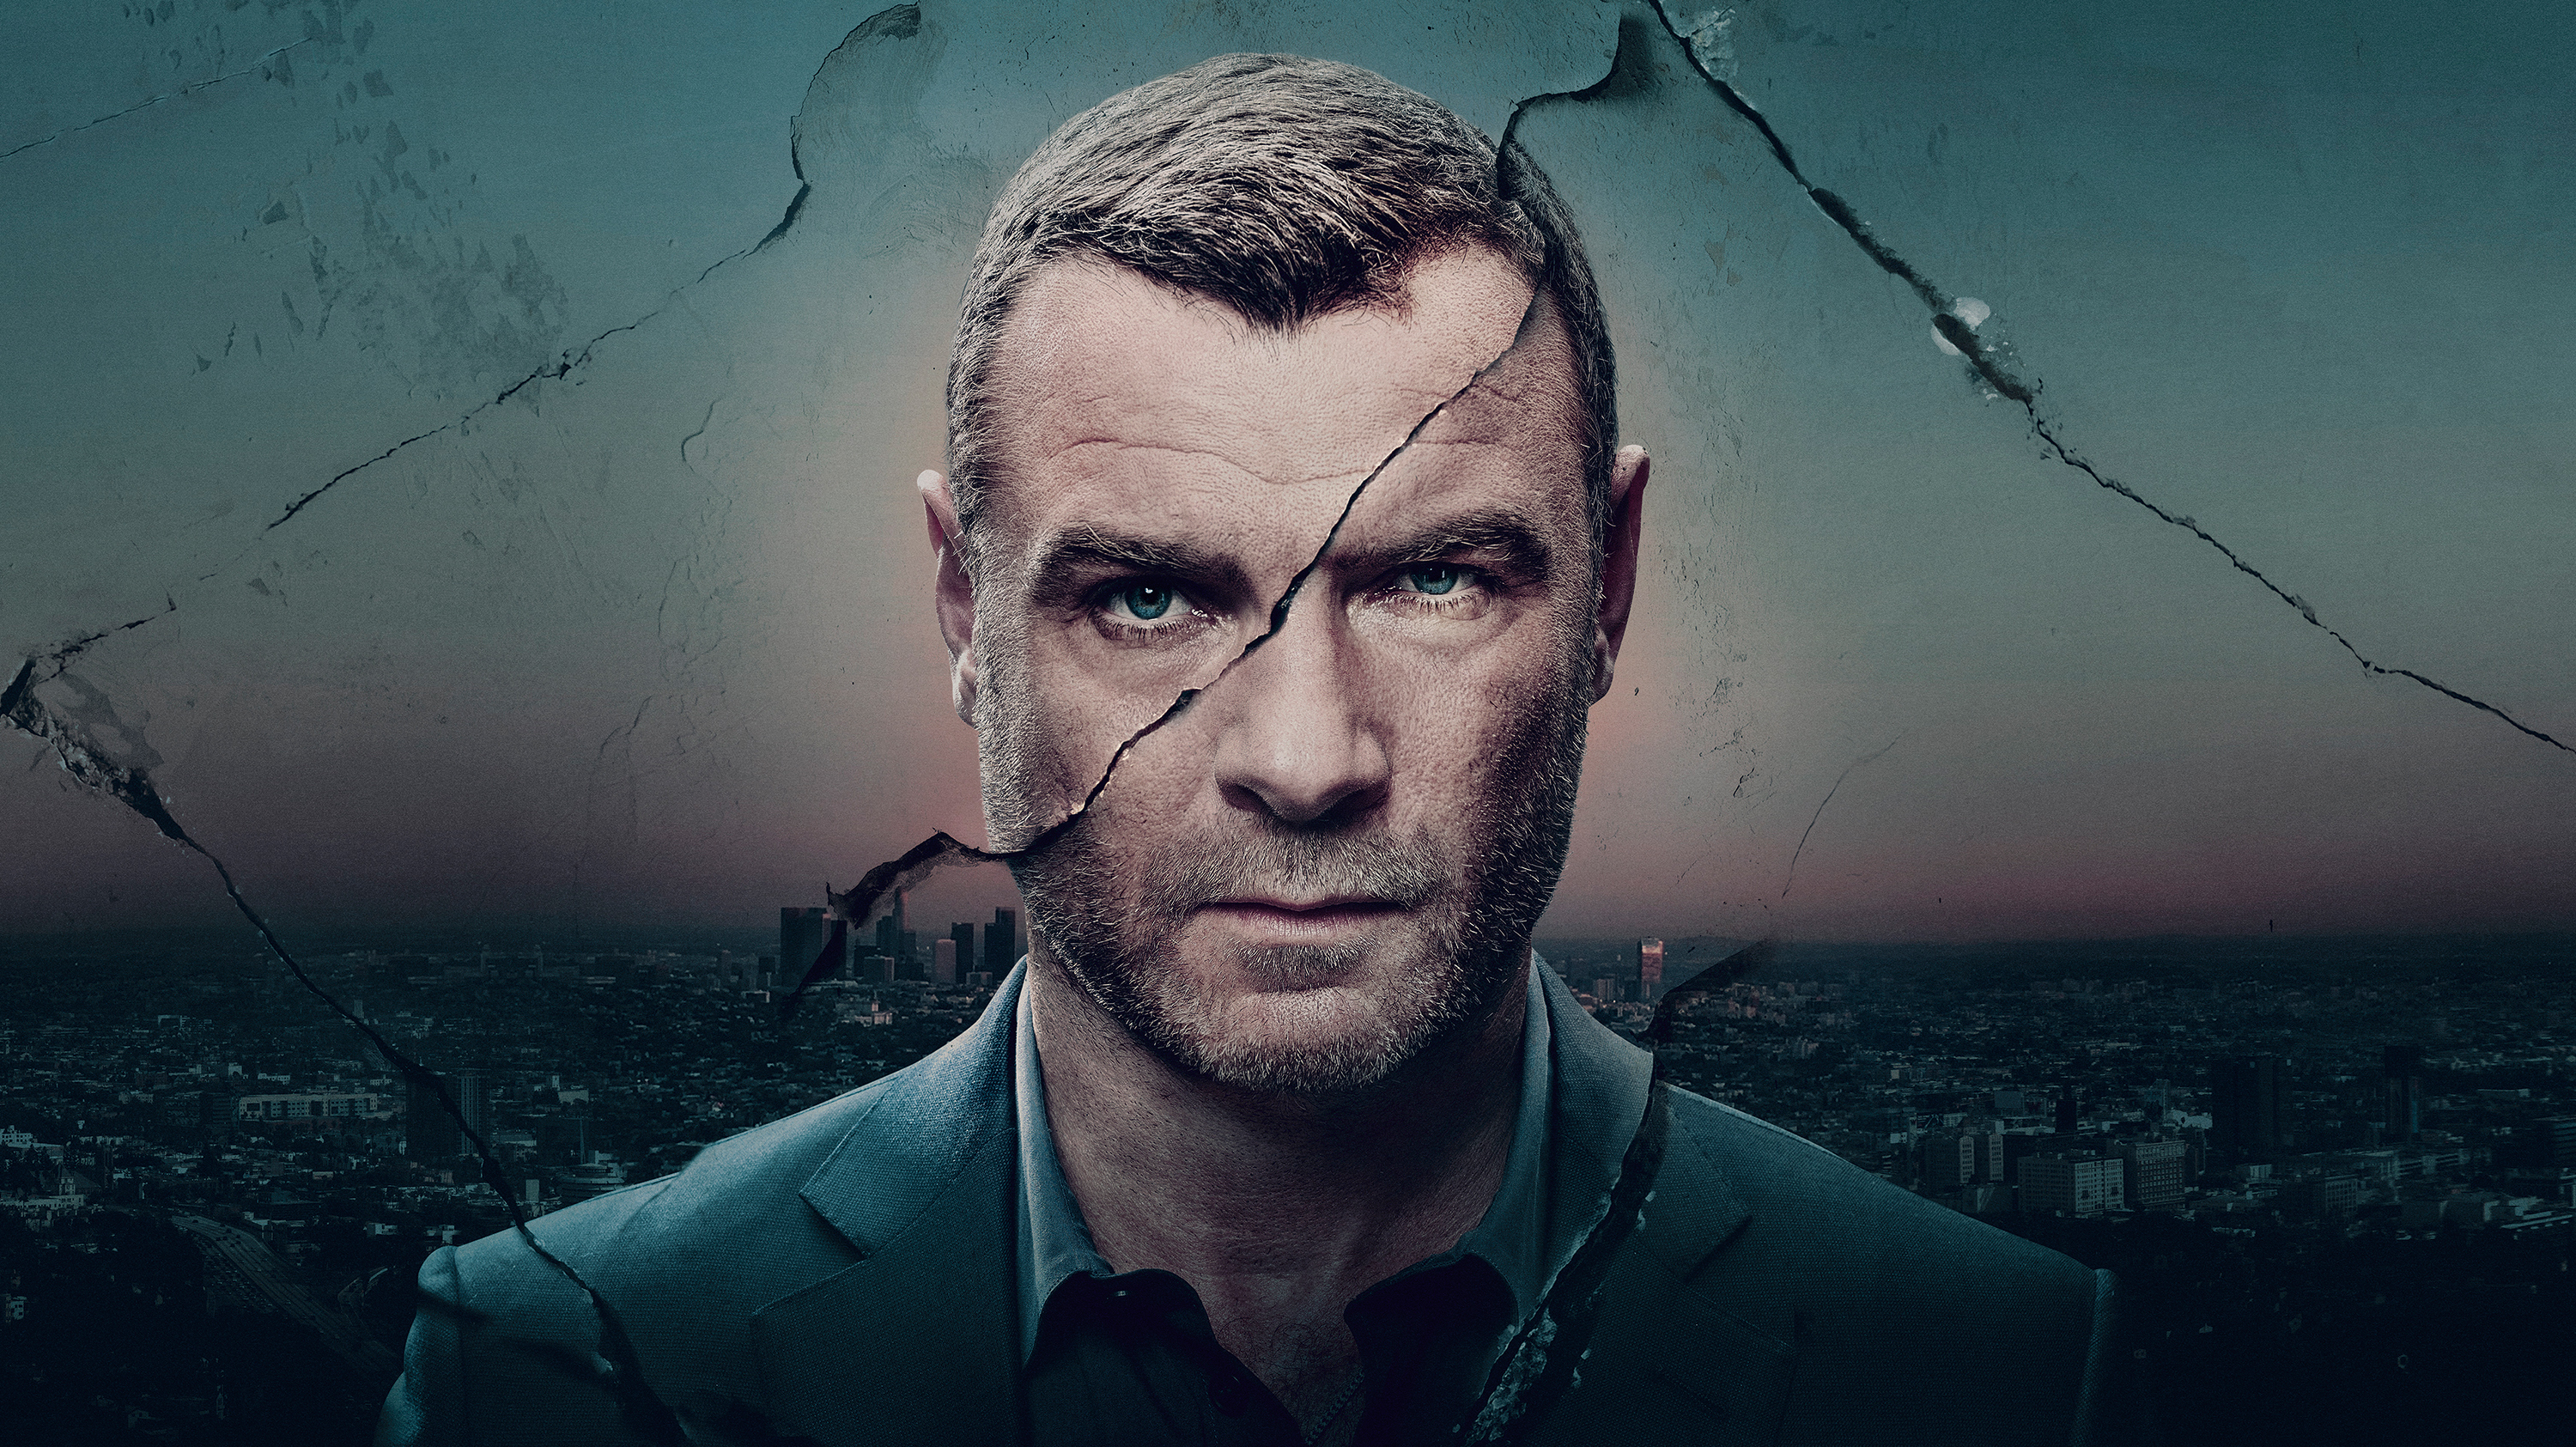 Ray Donovan Season 6 Wallpaper Hd Tv Series 4k Wallpapers Images Photos And Background